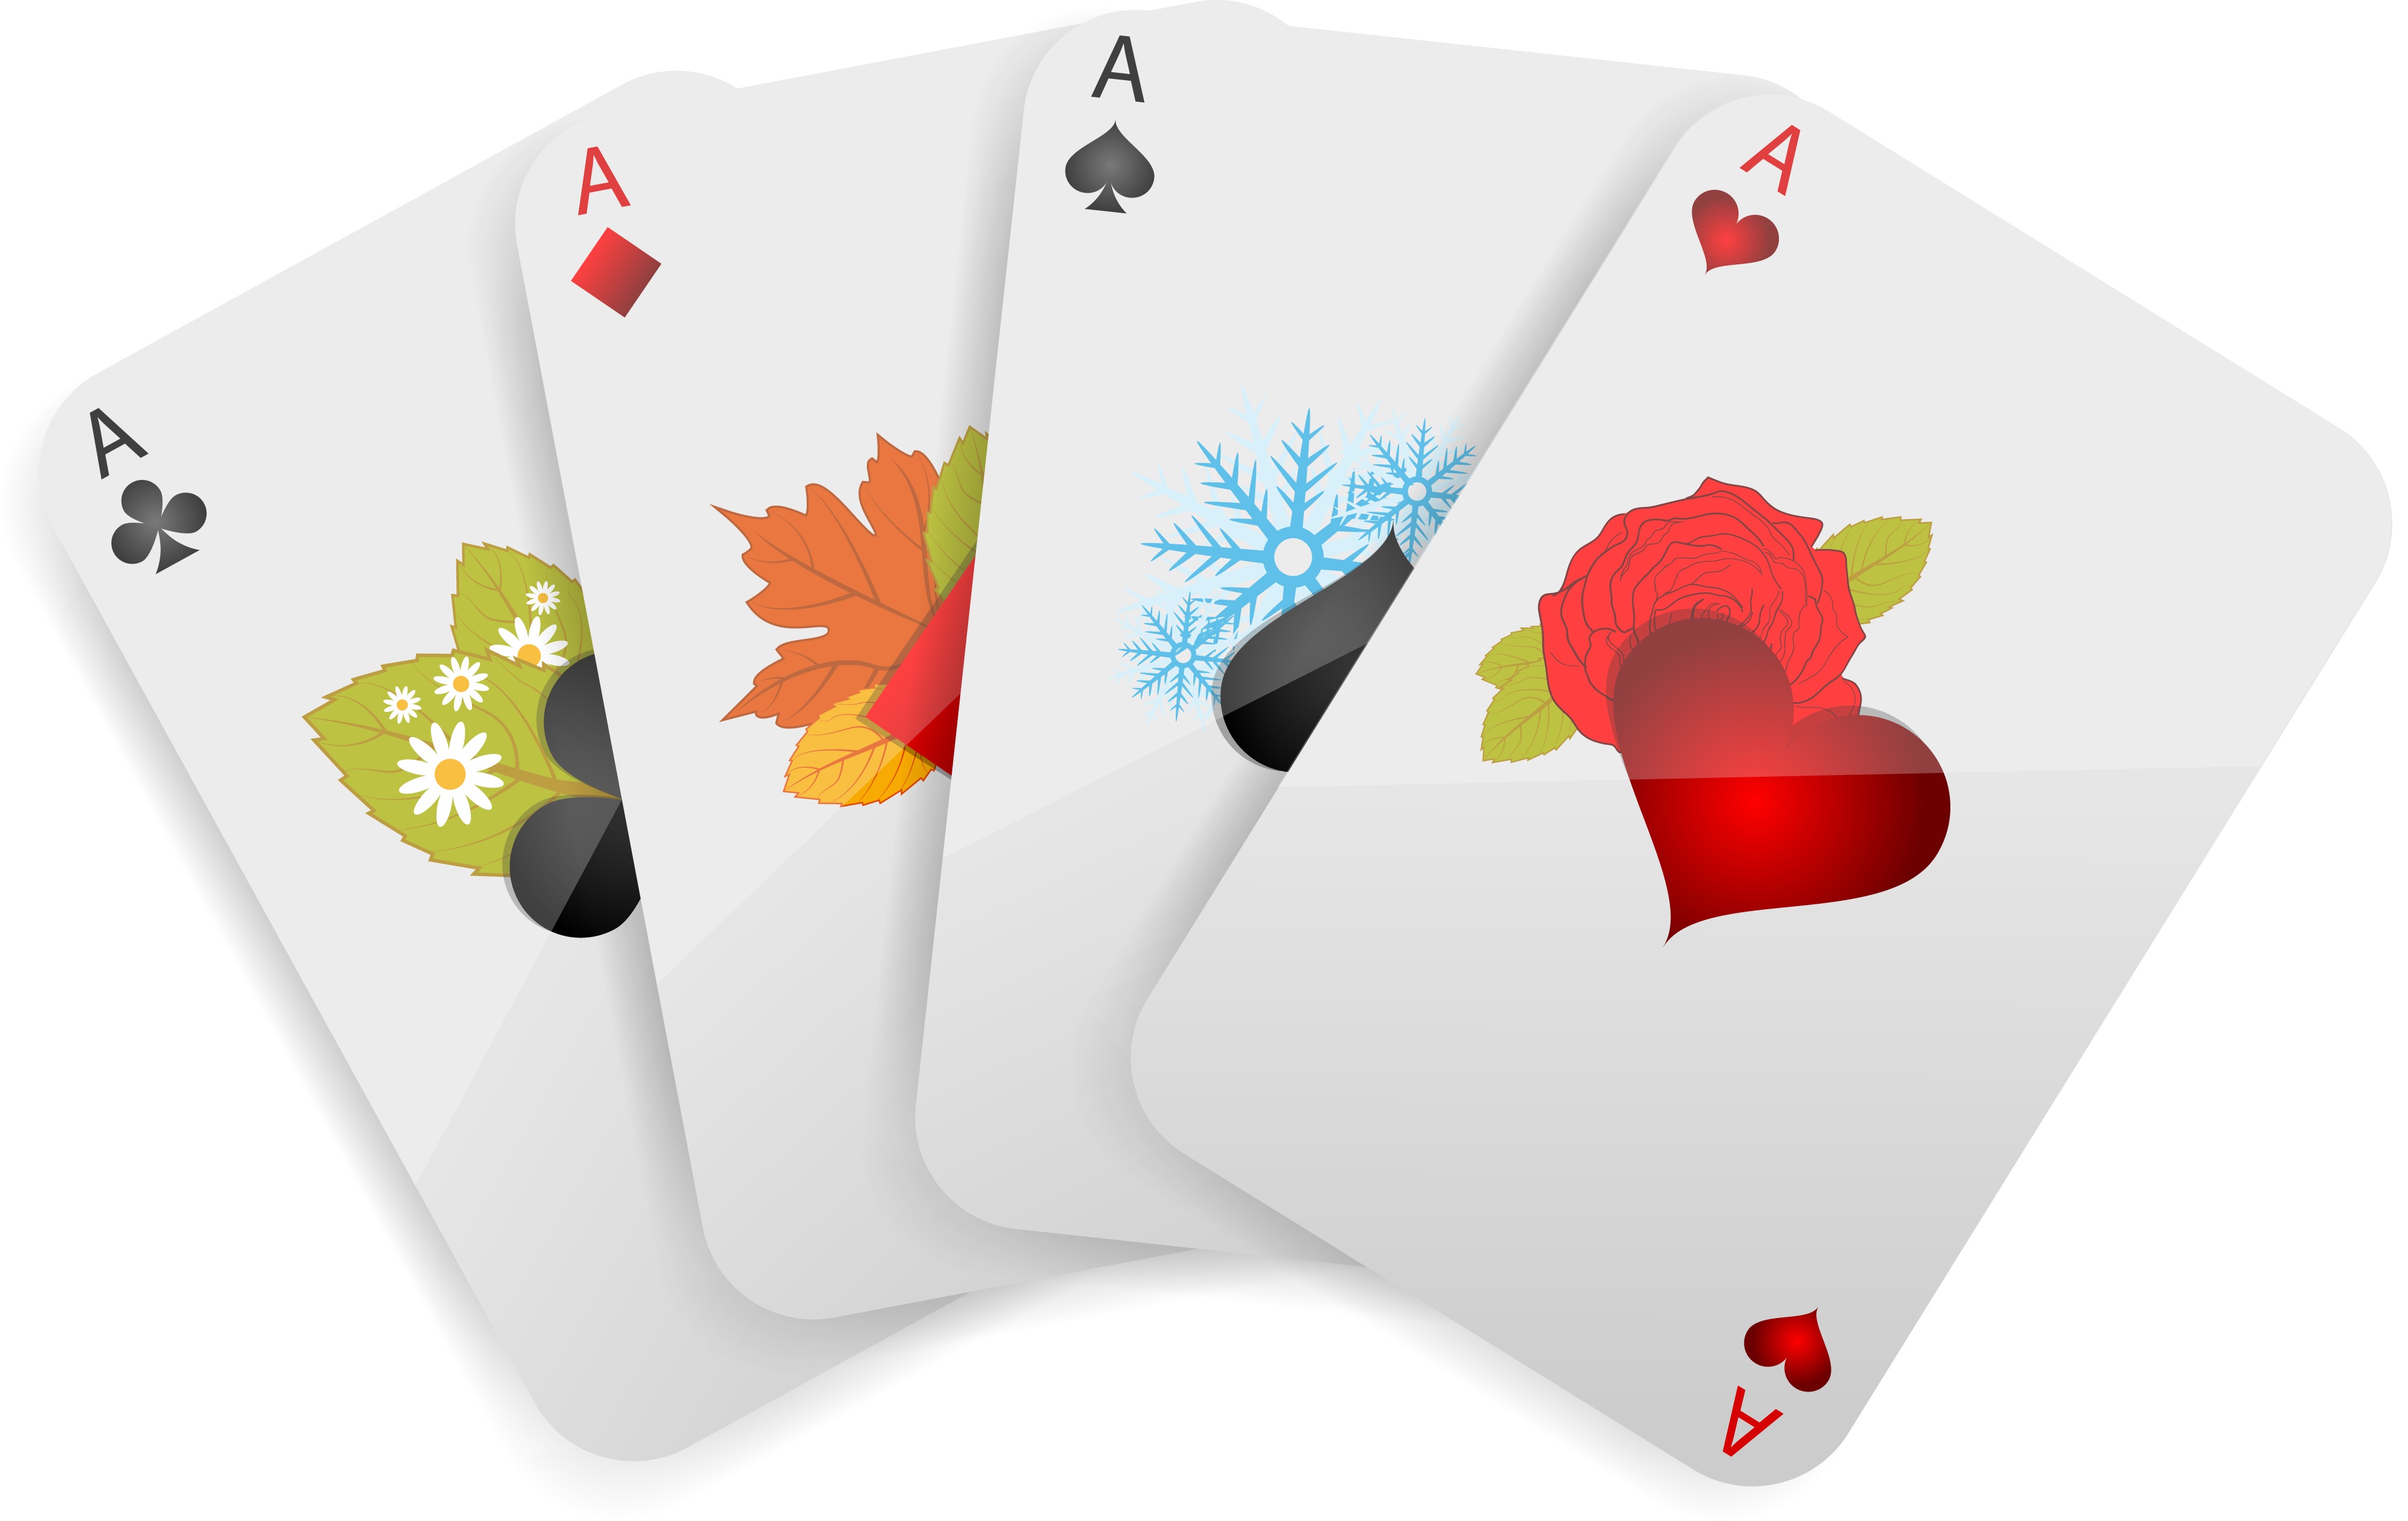 Four aces are decorated with seasonal foliage. The ace of clubs represents spring with fresh leaves and white flowers. The ace of diamonds represents autumn with a grouping of leaves in green, orange, yellow, and red. The ace of spades represents winter with icy blue snowflakes. The ace of hearts represents summer with a red rose.